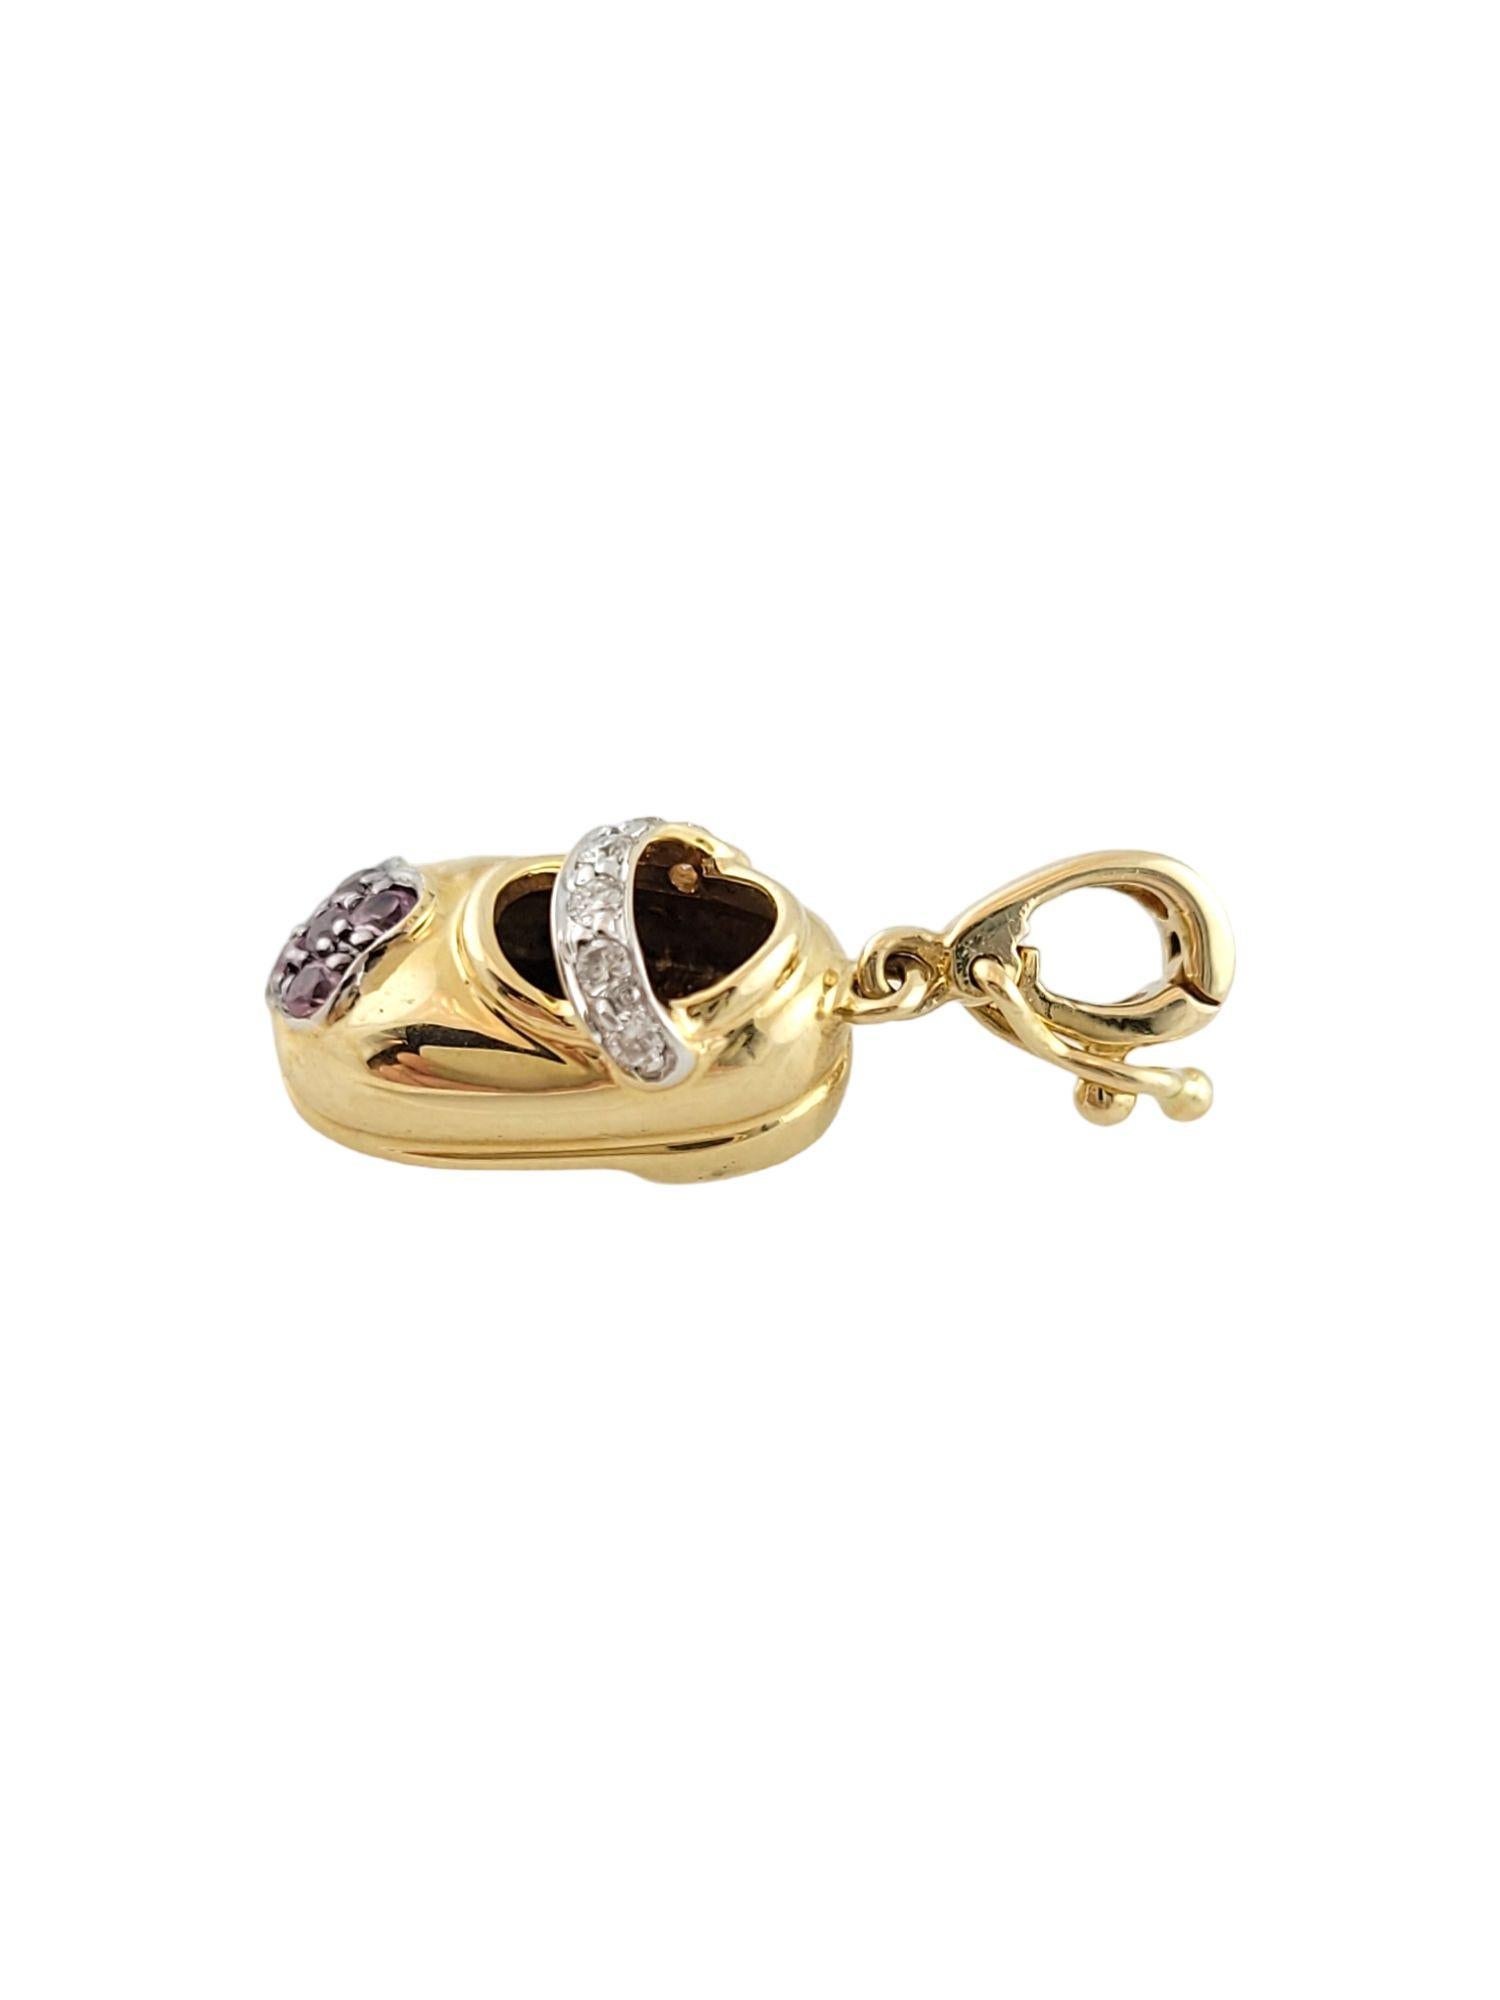 Round Cut 14k Yellow Gold Shoe Charm with Diamonds & Purple Stones For Sale